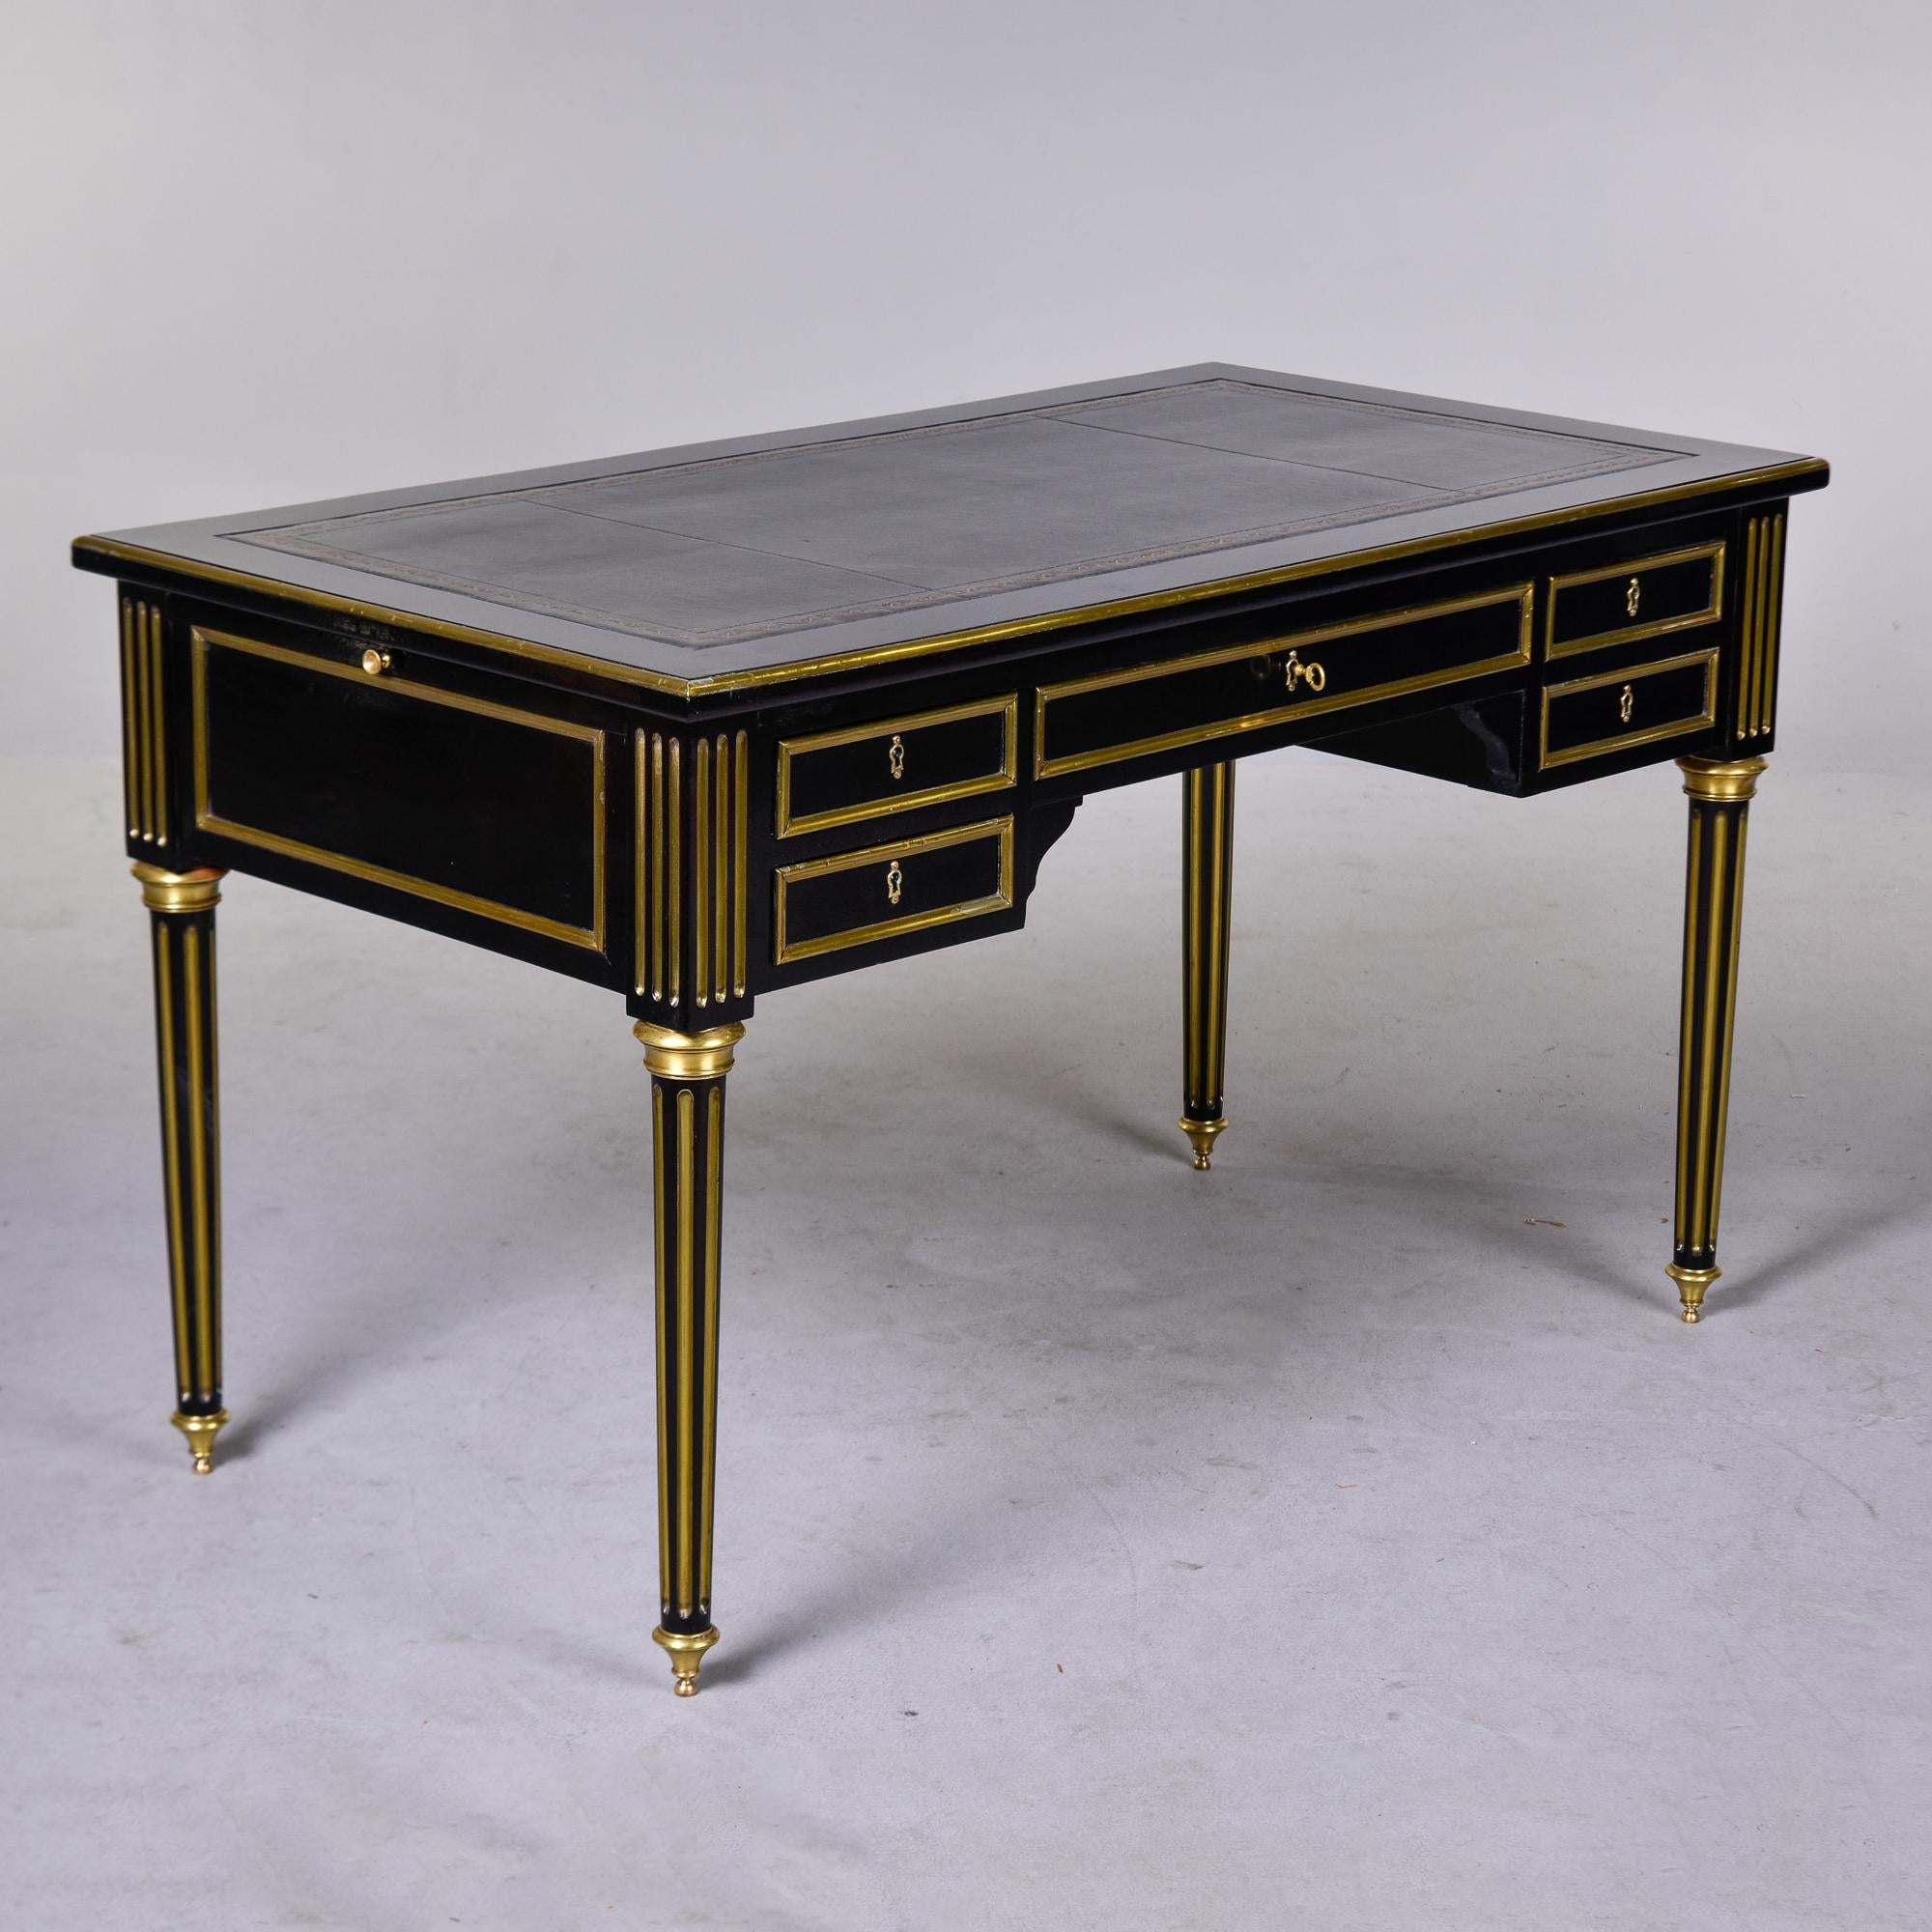 Found in France, this circa 1920s Louis XVI style desk has an ebonised finish and new black leather writing surface. The desk is finished on both front and back sides and can float in a room. Locking drawers with dovetail construction, brass